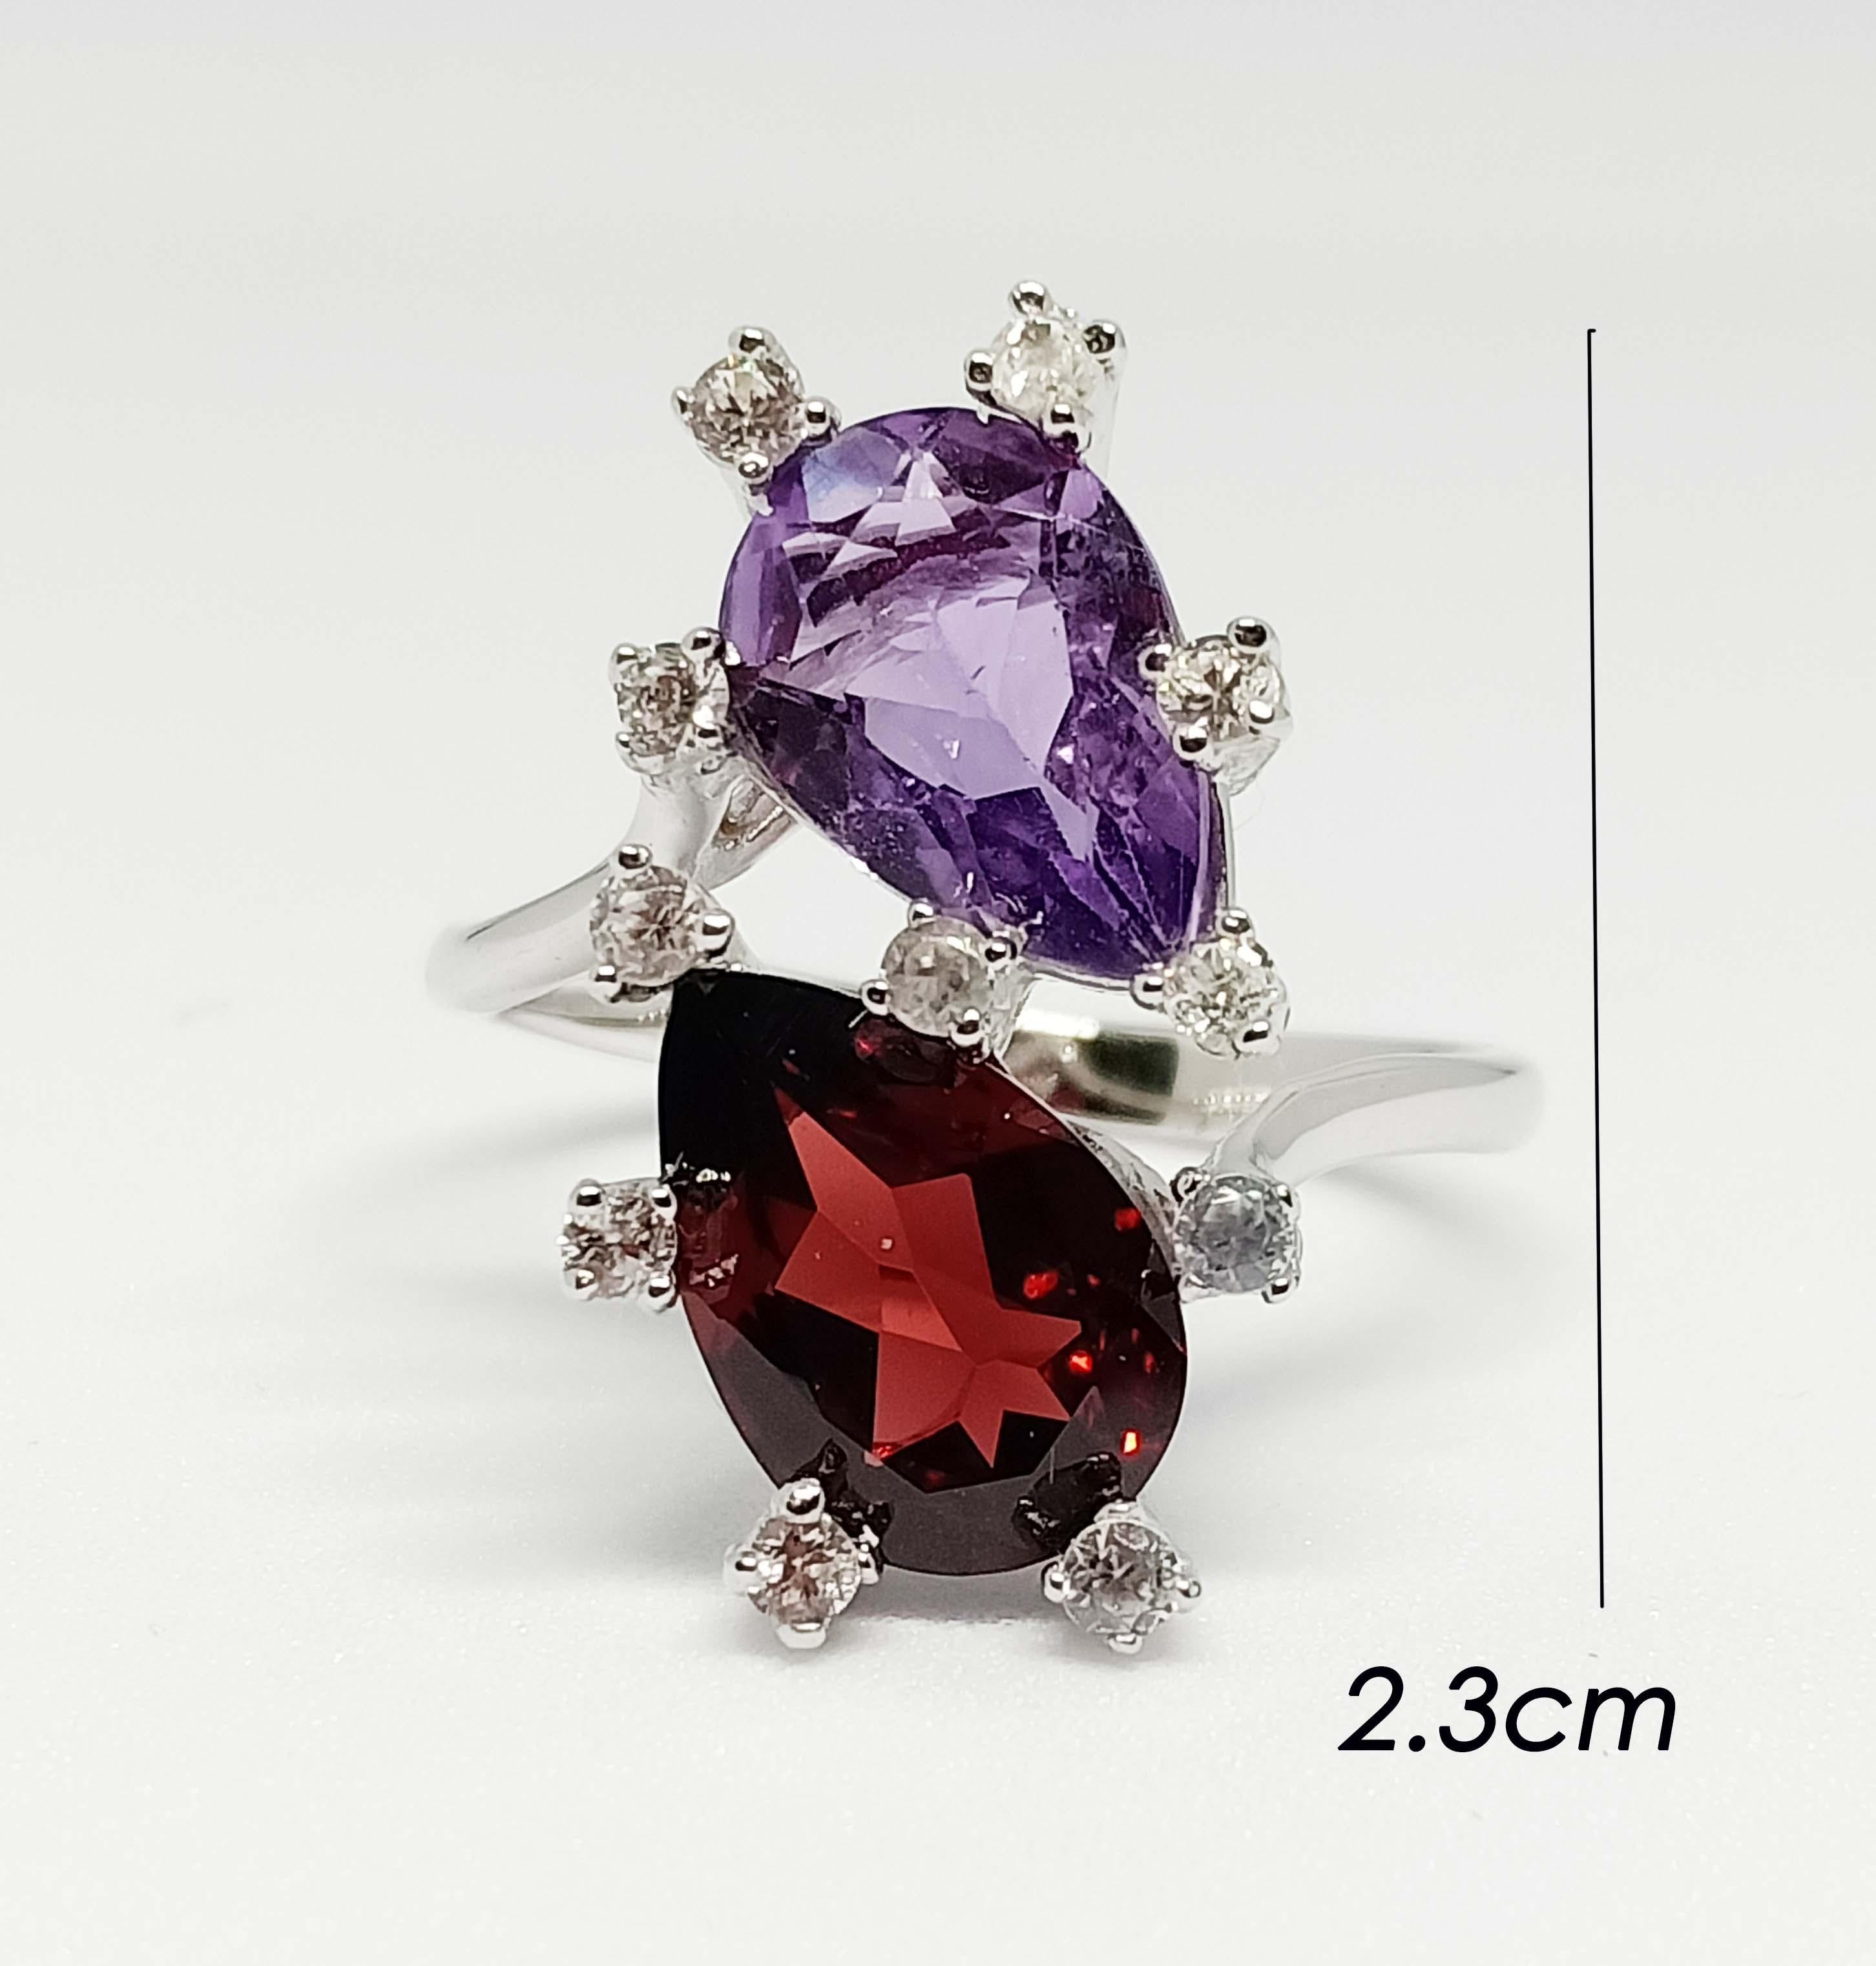 Garnet pear 3.20cts 1 pc.
Amethyst pear 2.40 cts. 1 pc.
White zircon round 2 mm 11 pcs.
White gold Plates over sterling silver
size 10 us.

Can be smaller resizable free. take up 7 days before ship.